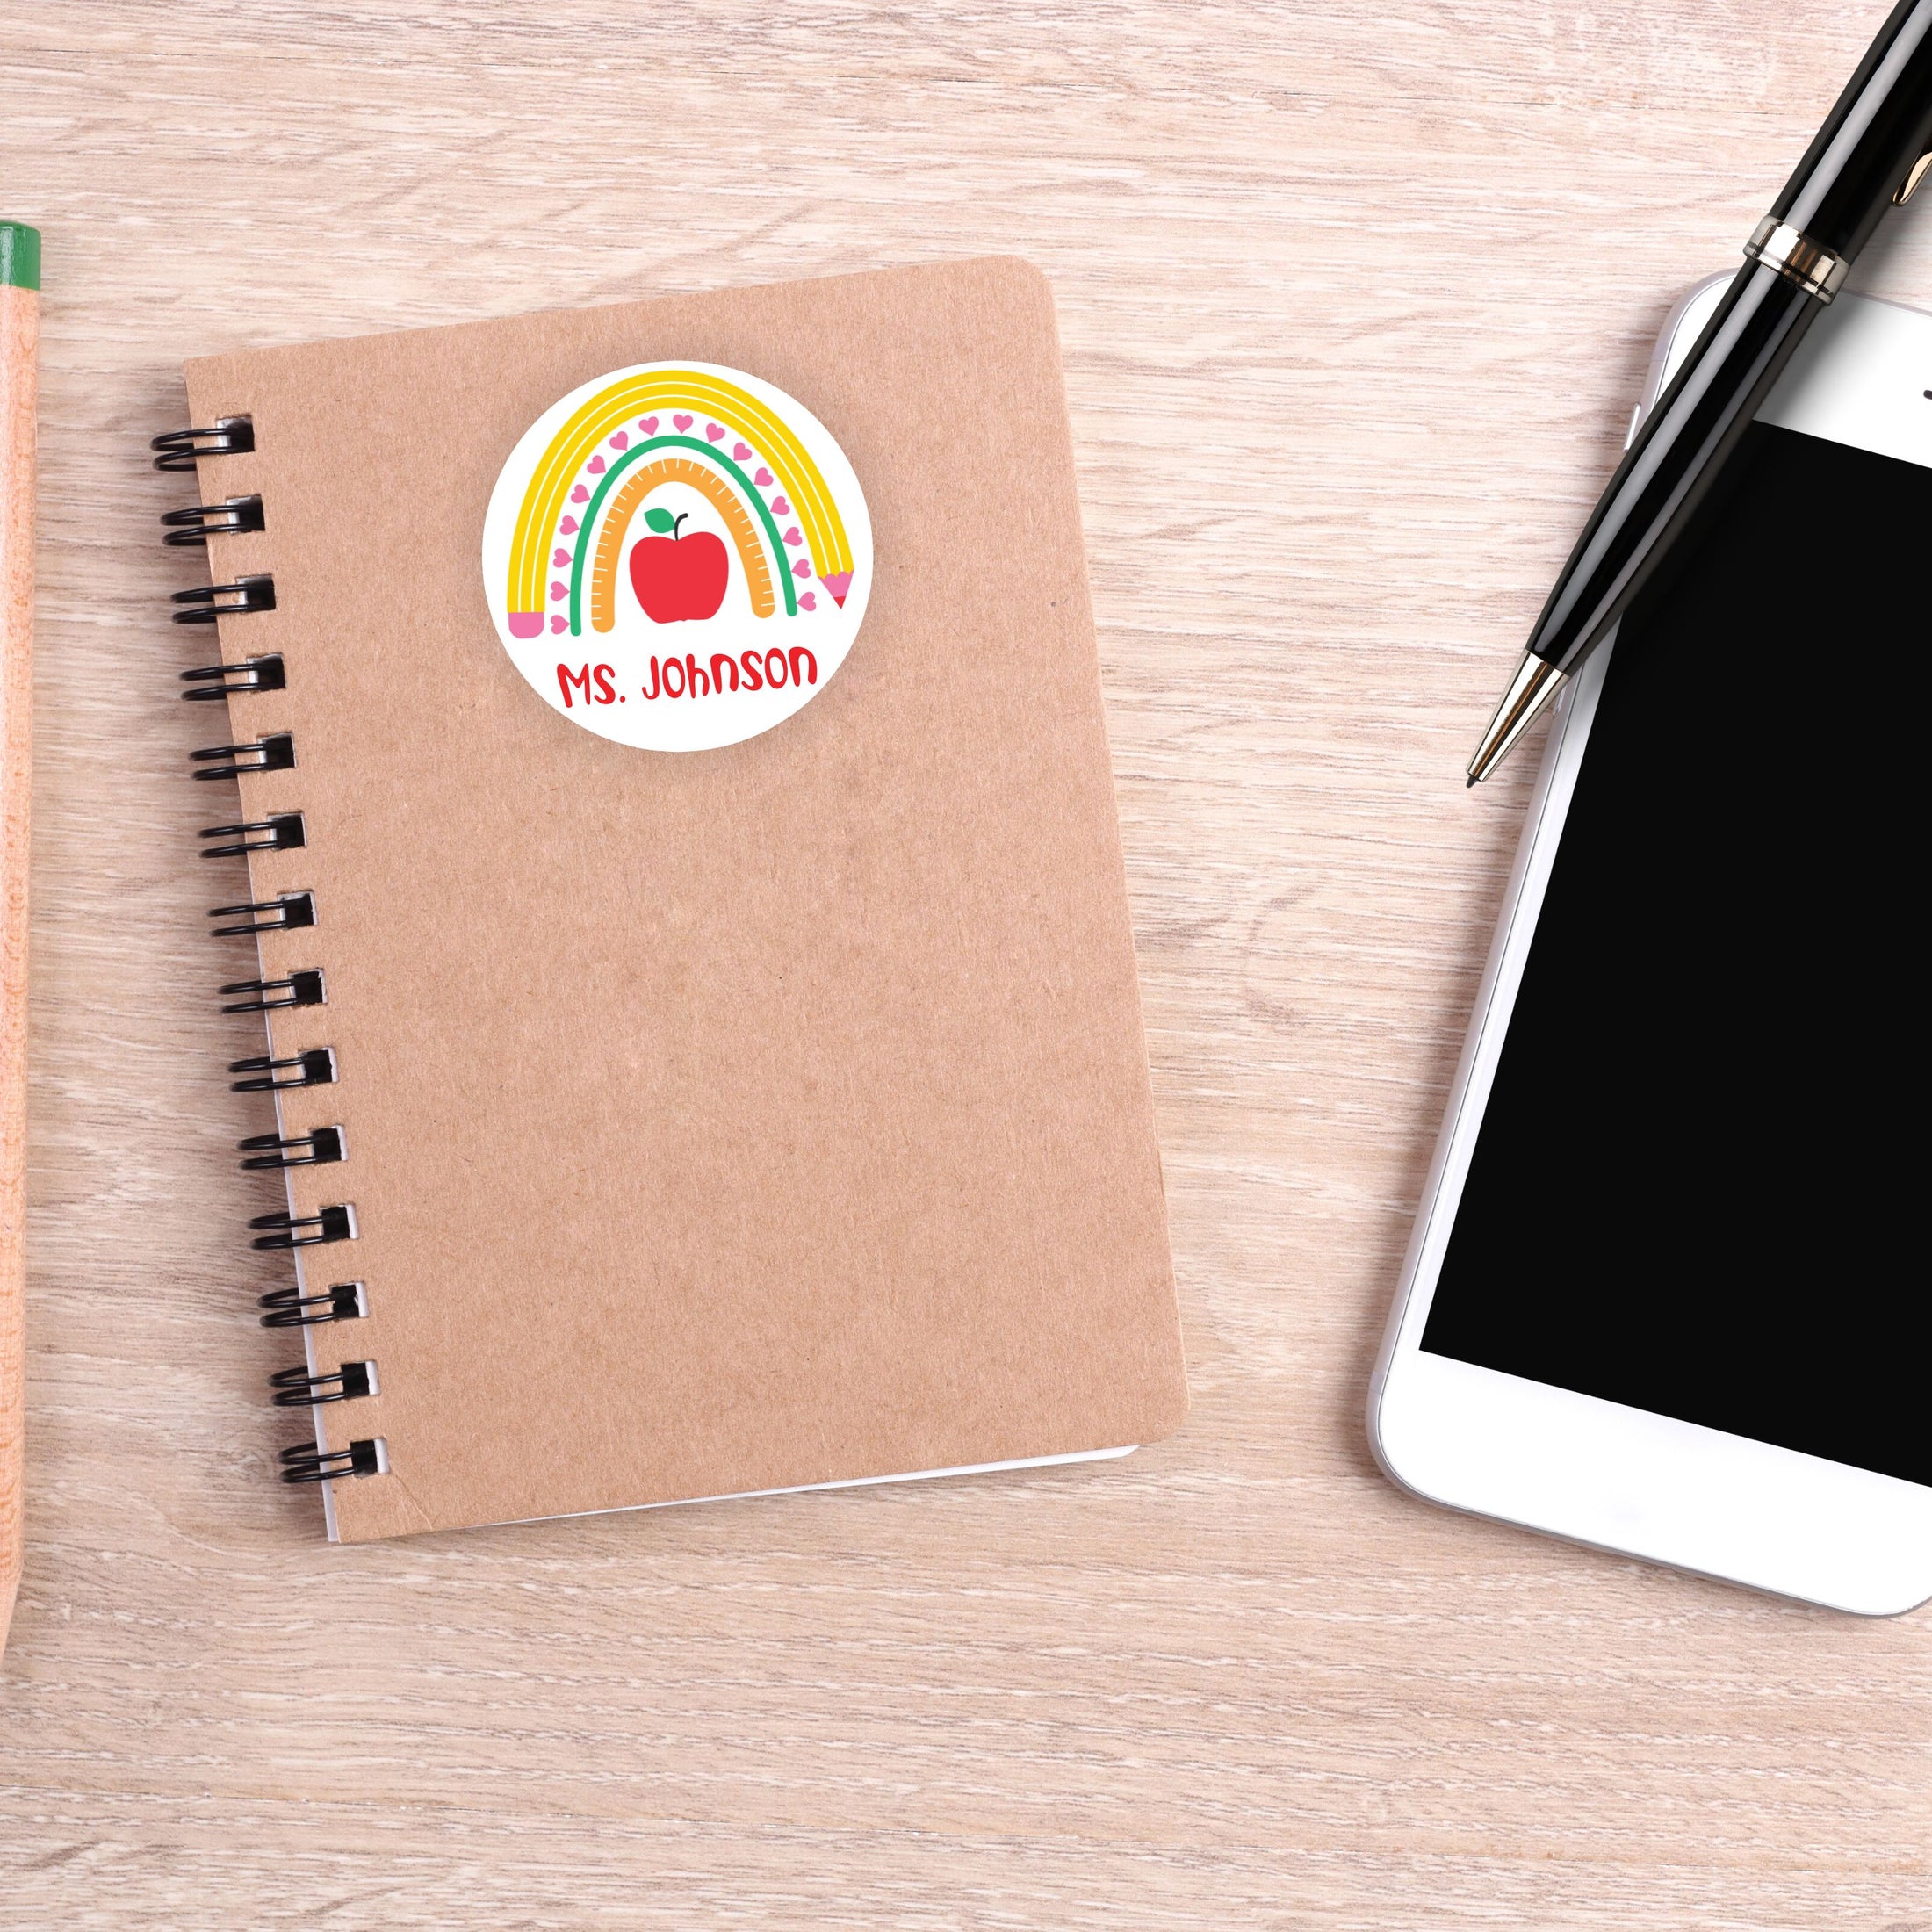 This image shows the personalized school sticker on a notebook next to a smartphone and pen.